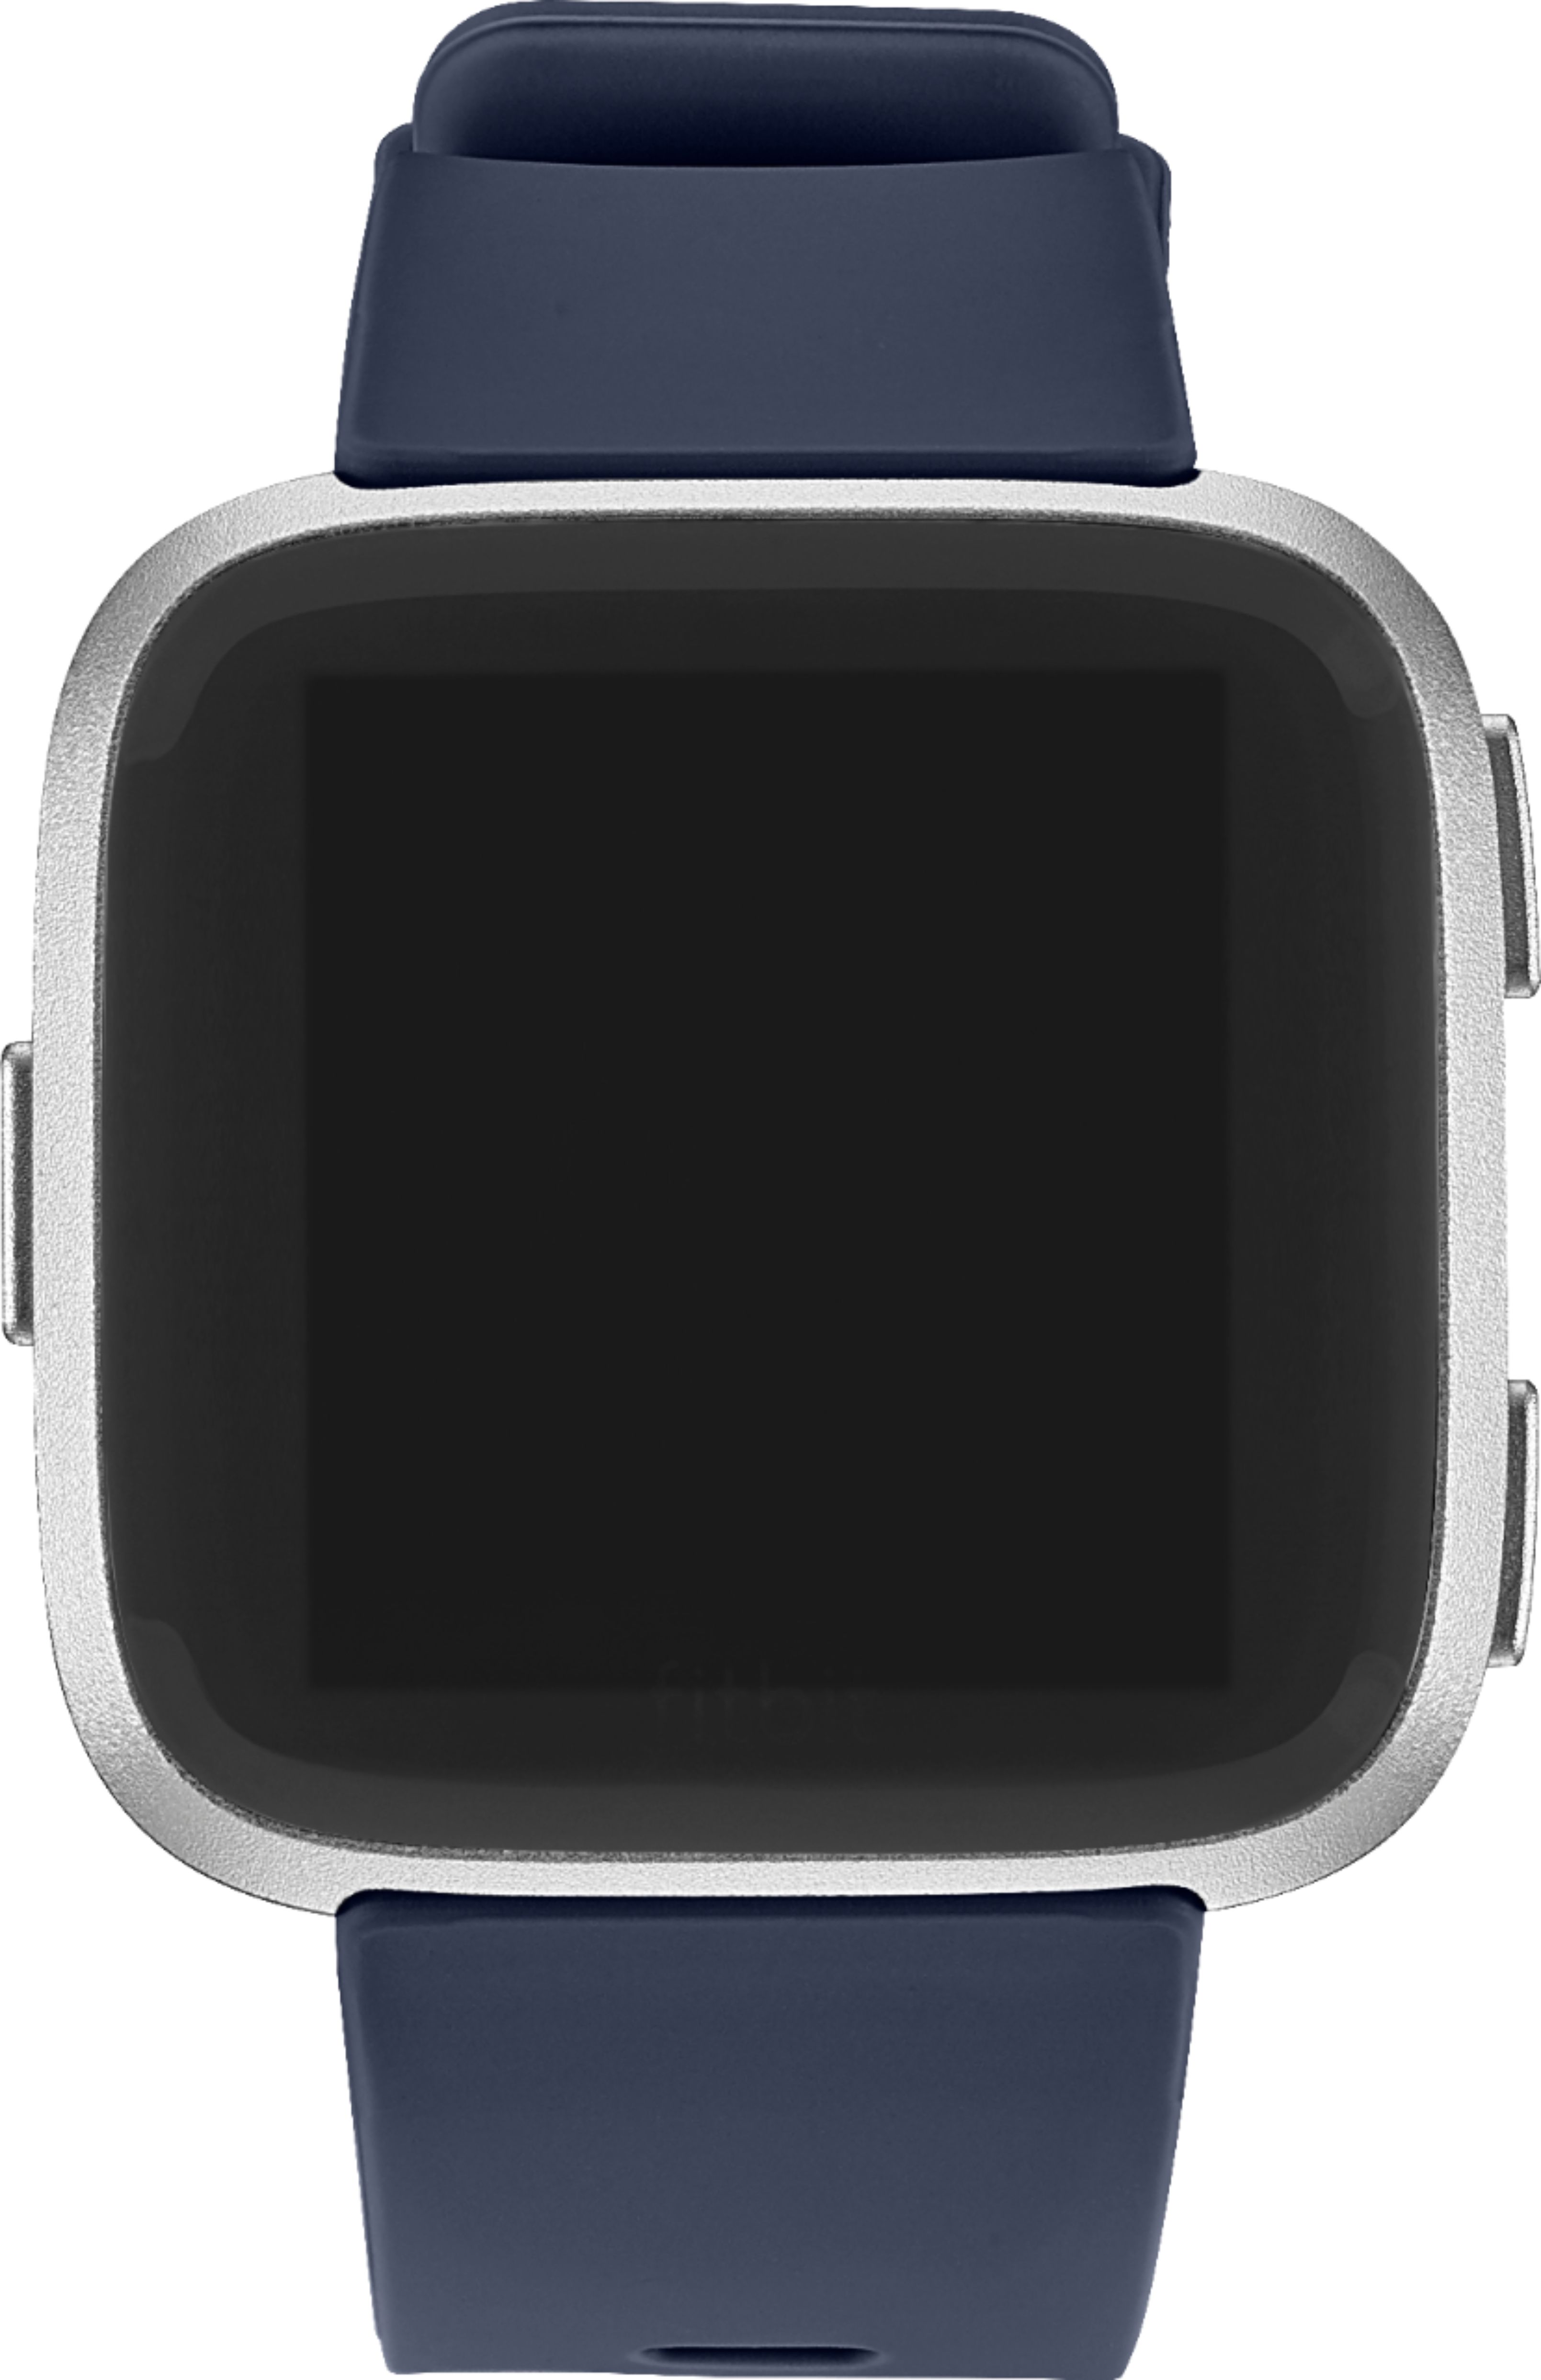 Best Buy: Modal™ Silicone Watch Band for Fitbit Versa 2, Fitbit Versa, and Fitbit Versa Navy Blue MD-FVBSNVY